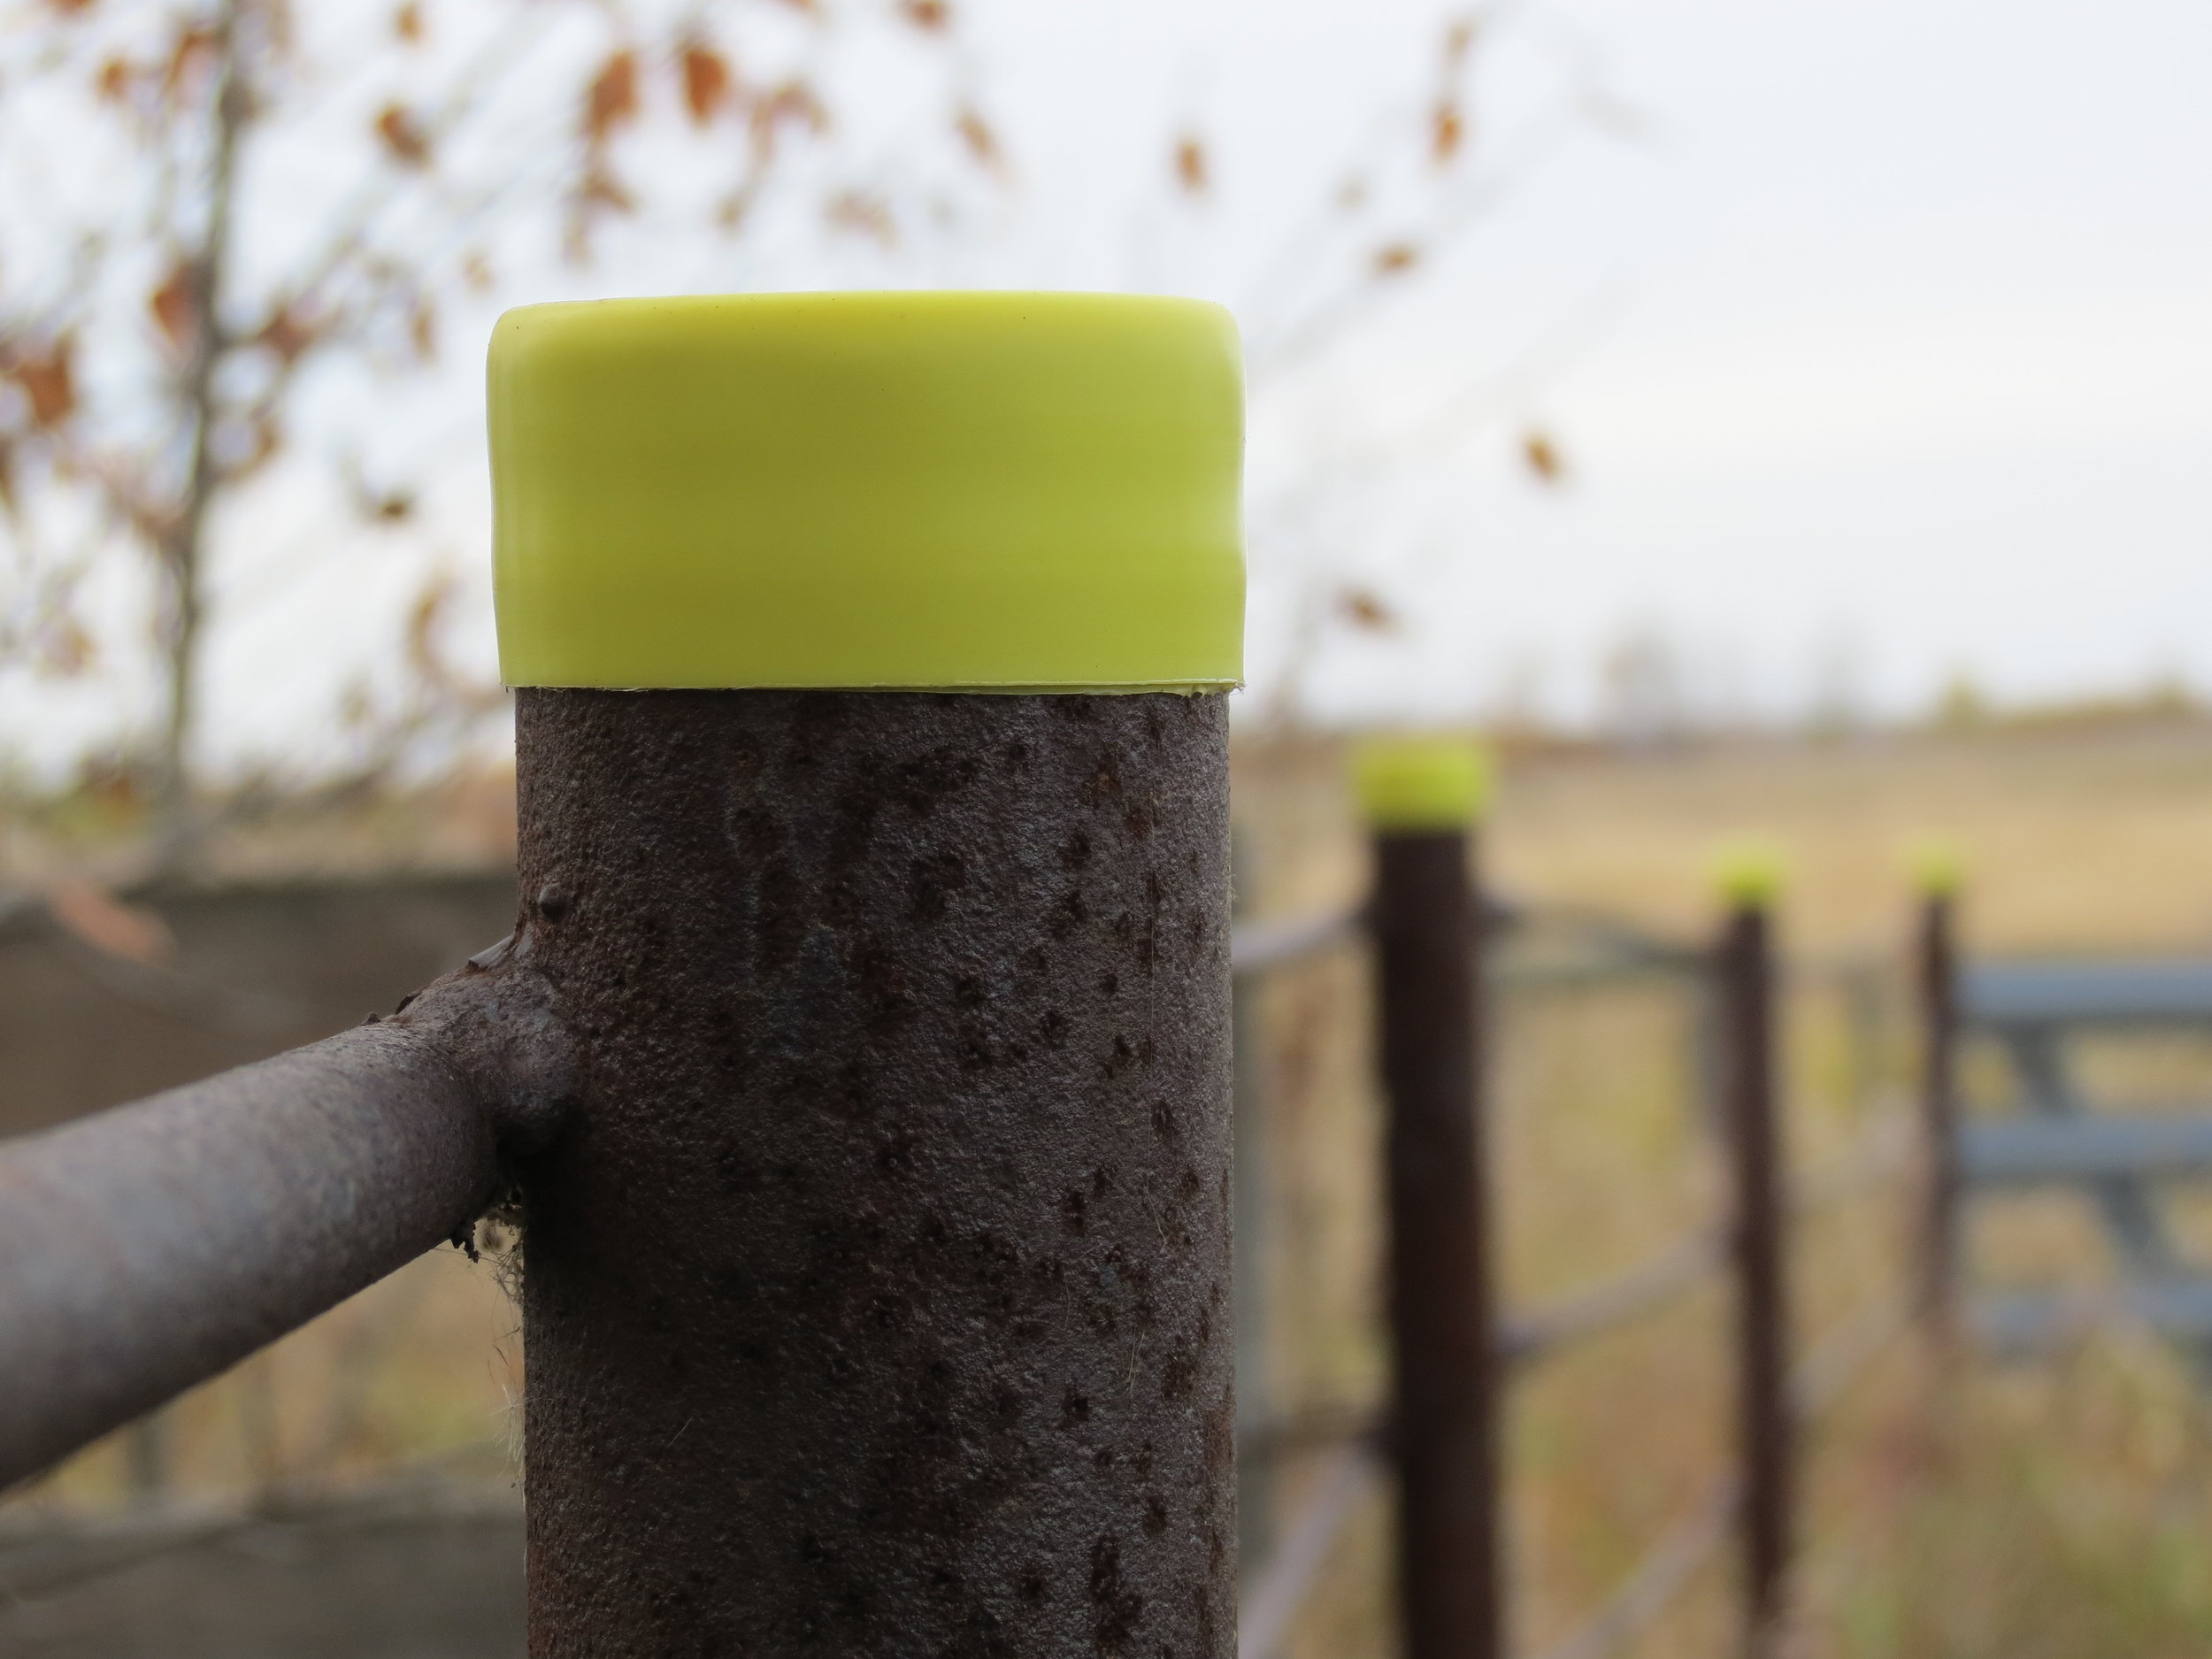 Plastic caps are a simple solution to cover open posts.